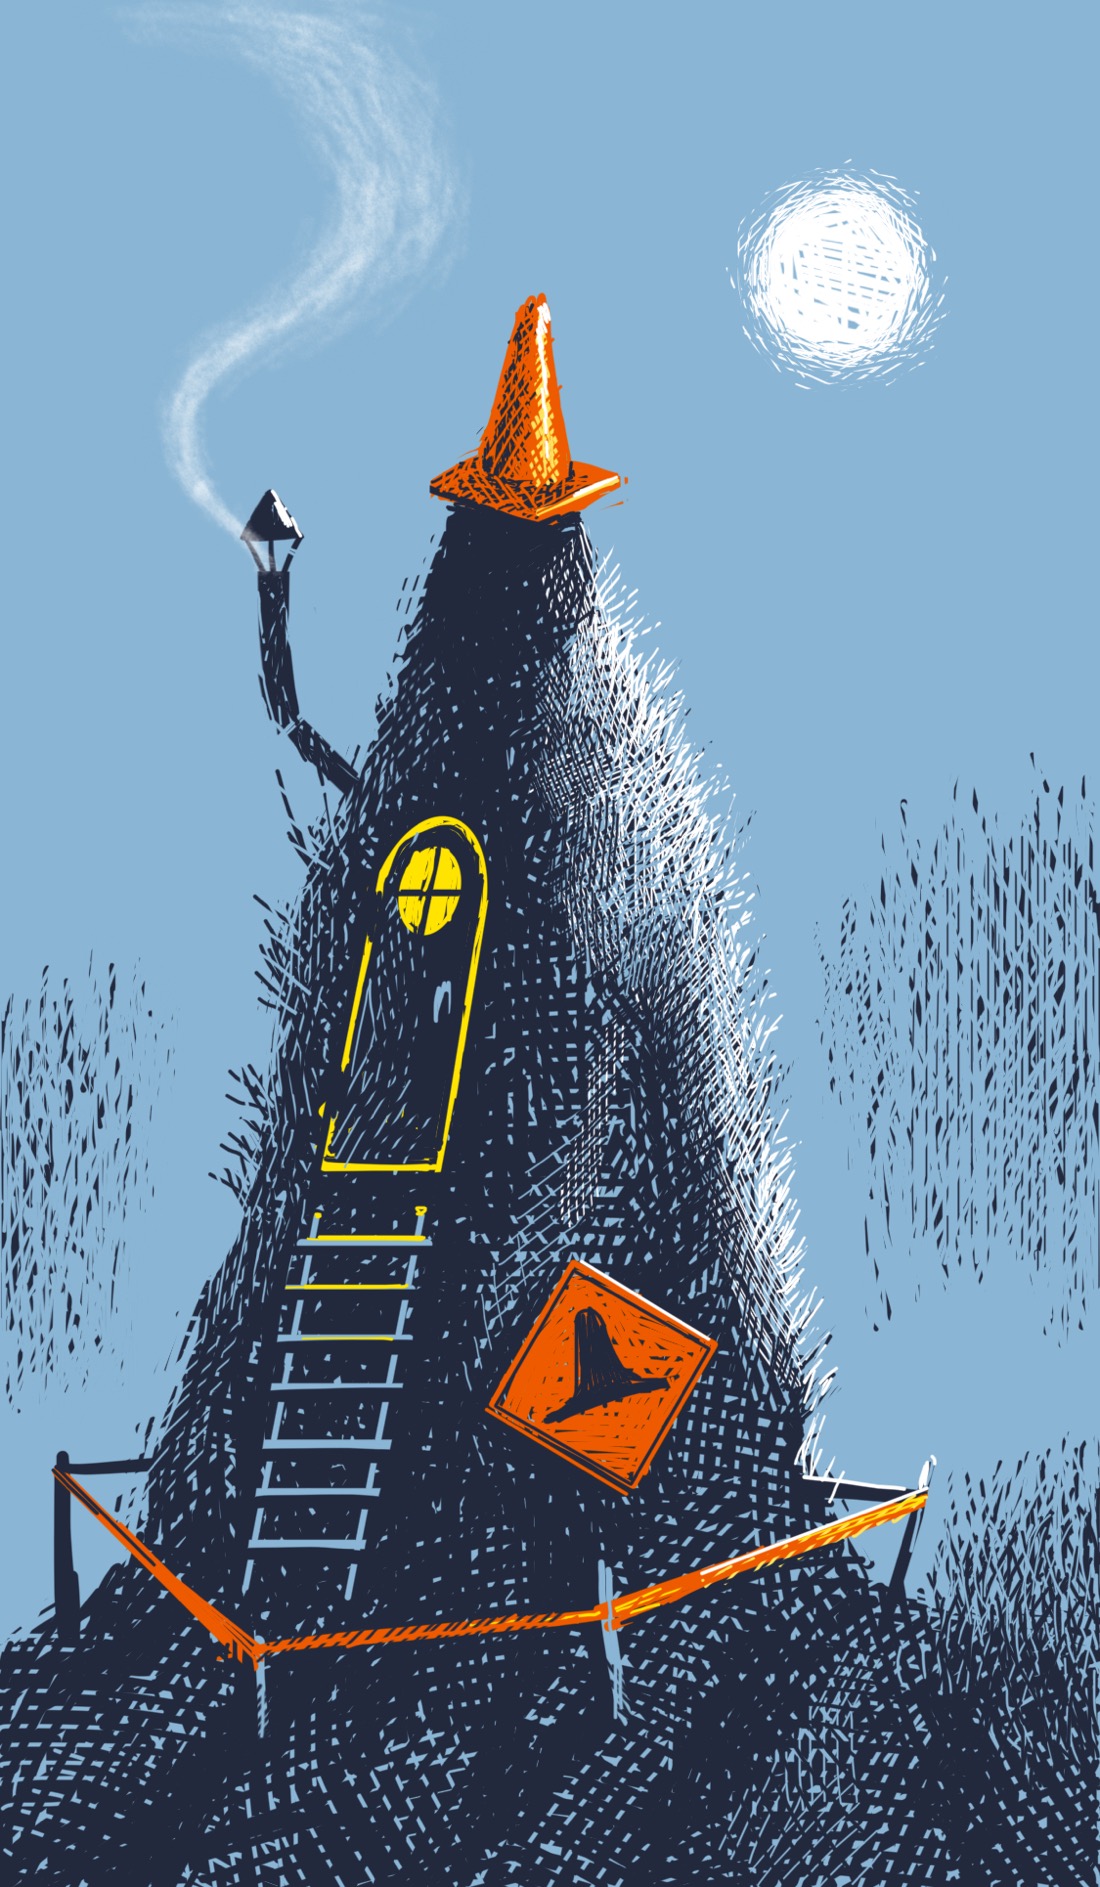 A large, conical hill made of soil. The hill is topped by an orange road cone and surrounded by orange tape, as though it's a construction zone; an orange warning sign indicating a bump is affixed to the hill. Under other circumstances, this might look like a particularly egregious construction project, but the perceptive observer will notice a door and chimney stuck in the hill, indicating a resident. It is evening. A full moon illuminates the scene. Drive carefully.